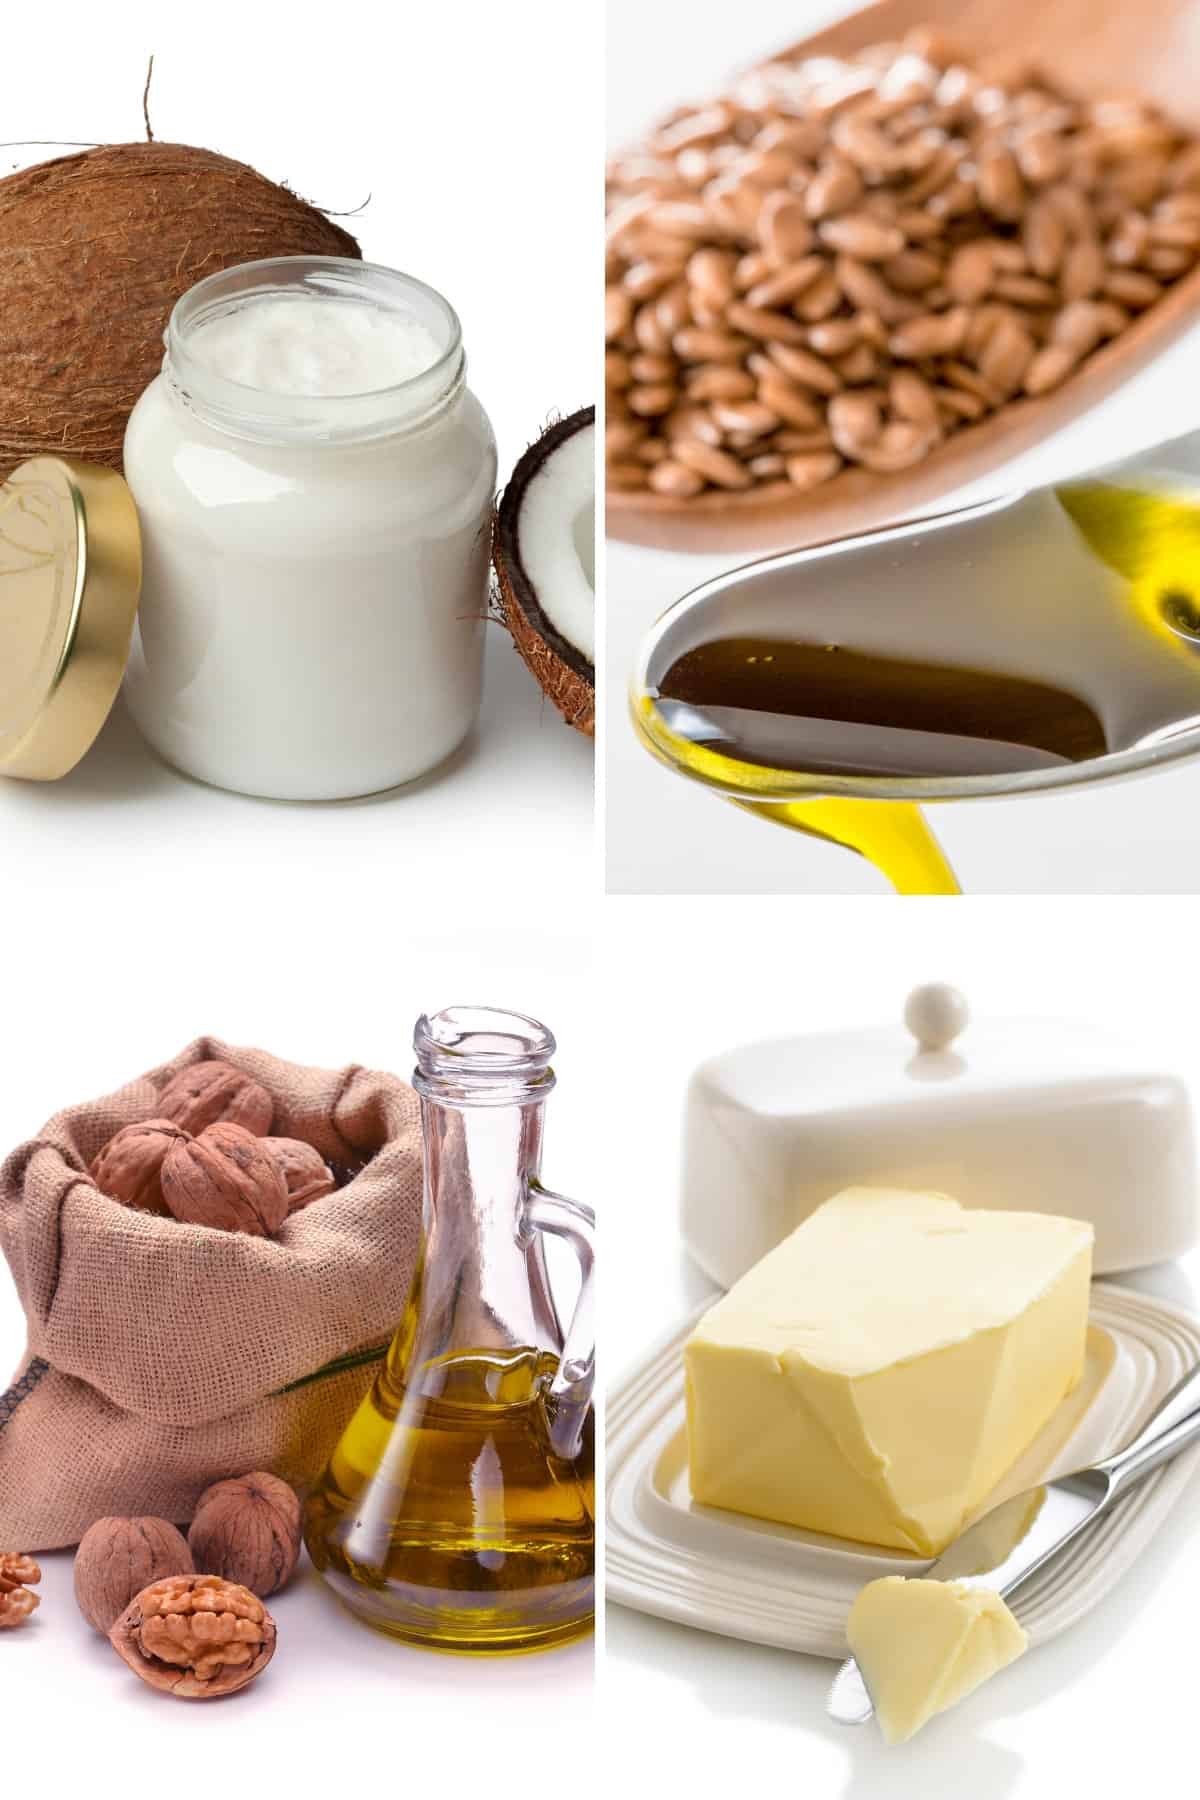 coconut oil, flaxseed oil, walnut oil, and butter